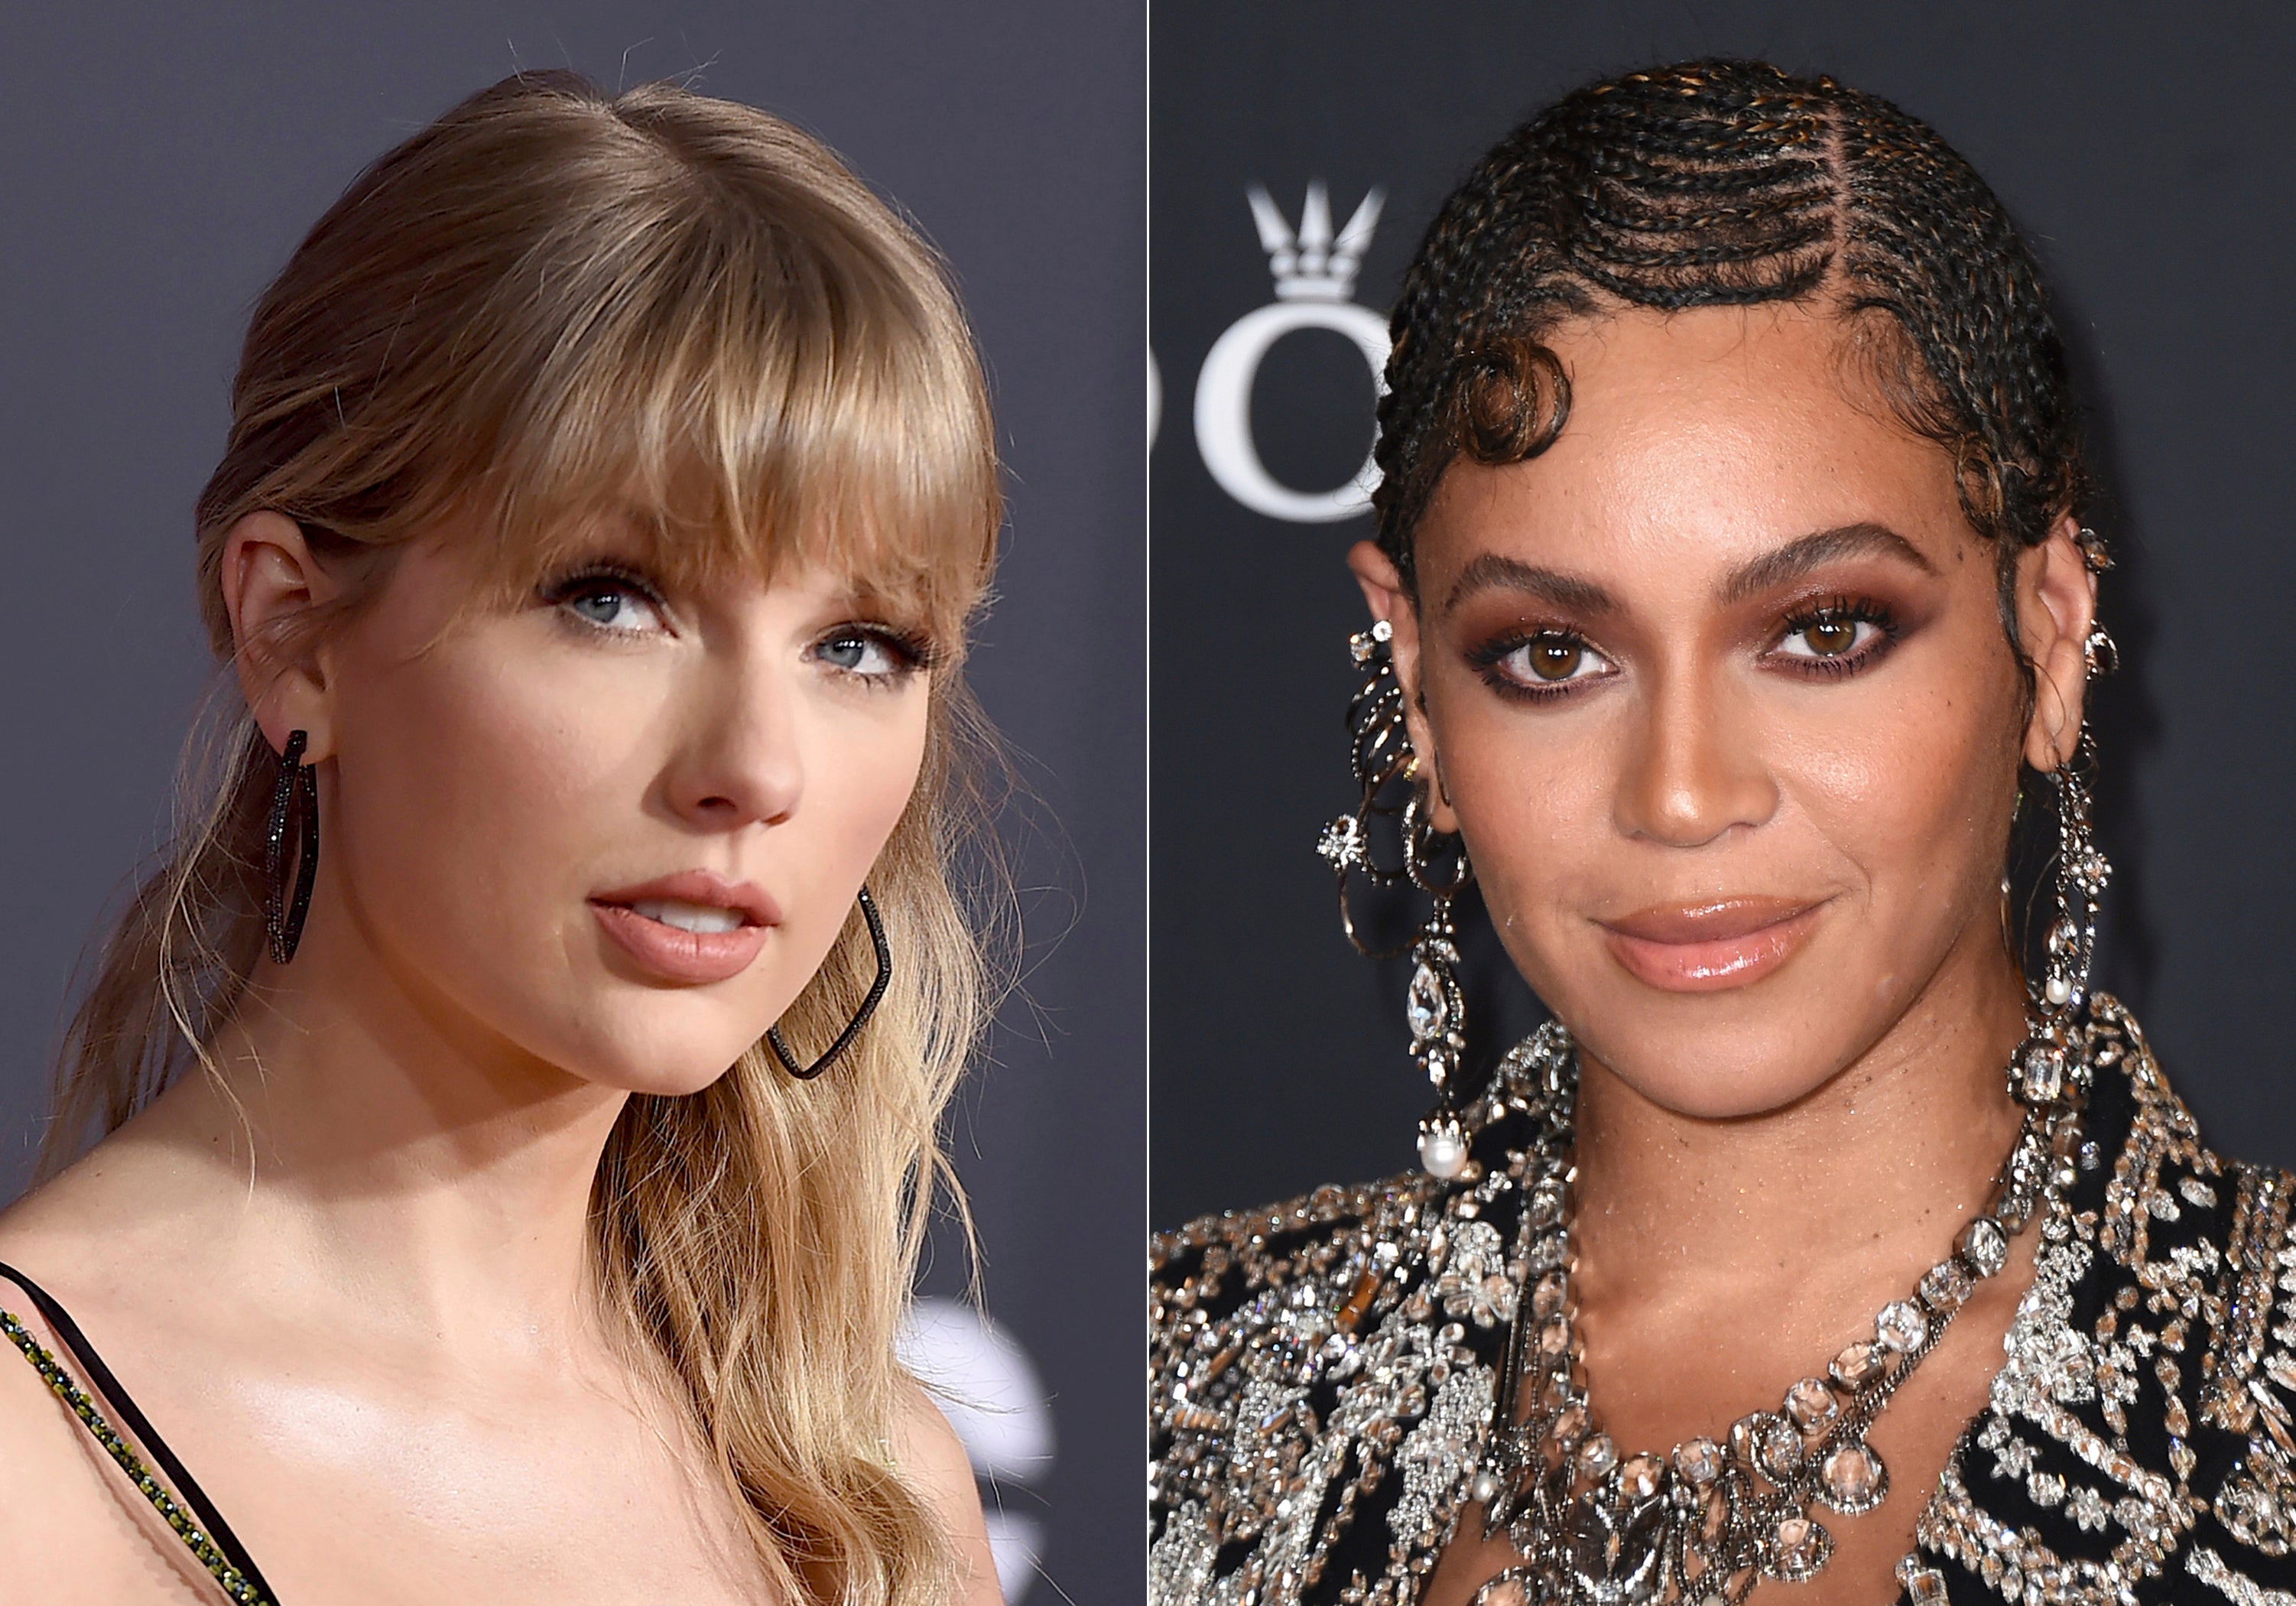 Taylor Swift and Beyonce have been busy smashing industry records